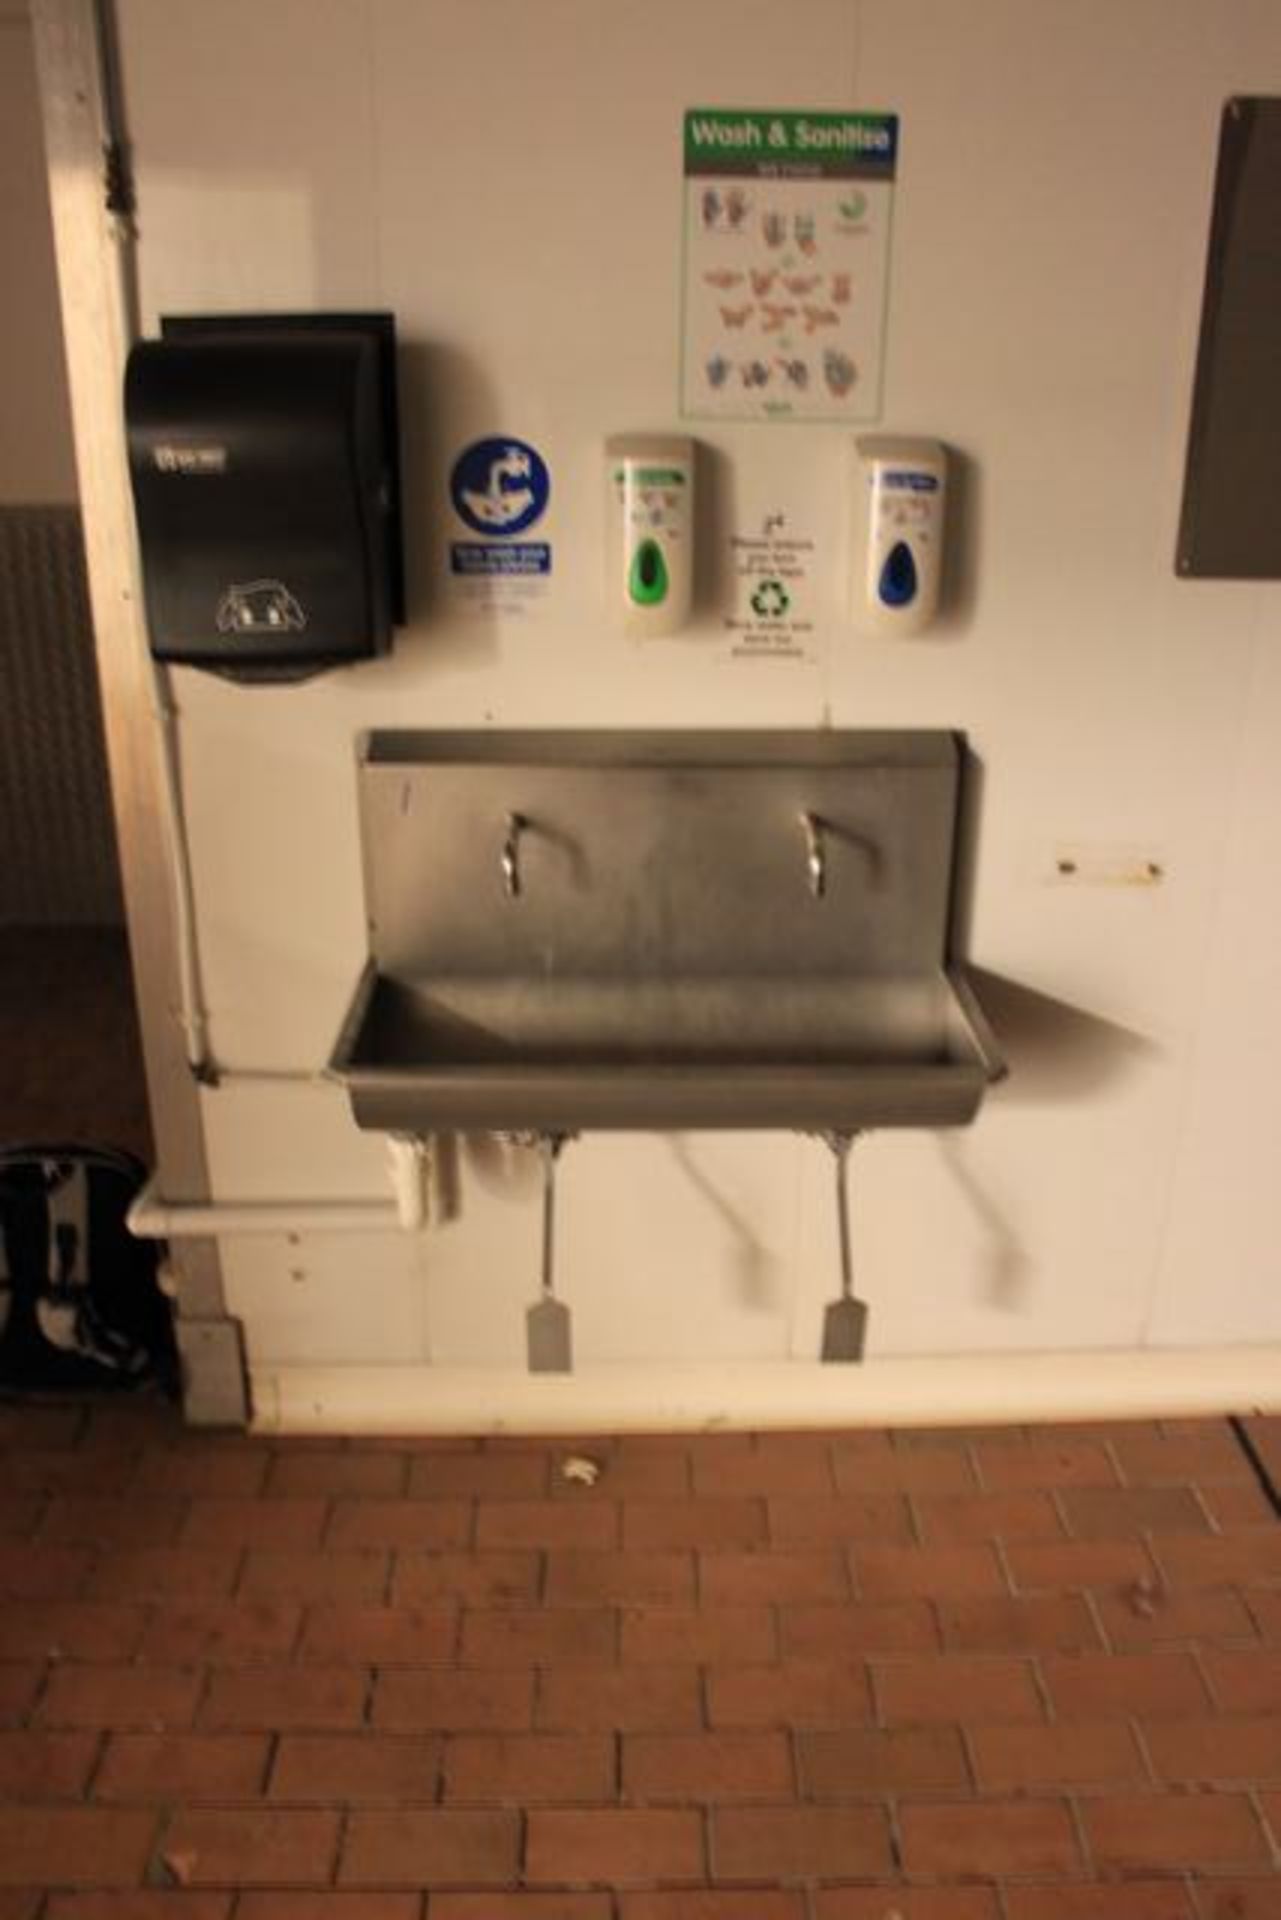 Stainless steel twin station knee operated sink with soap and towel dispenser - Image 2 of 2